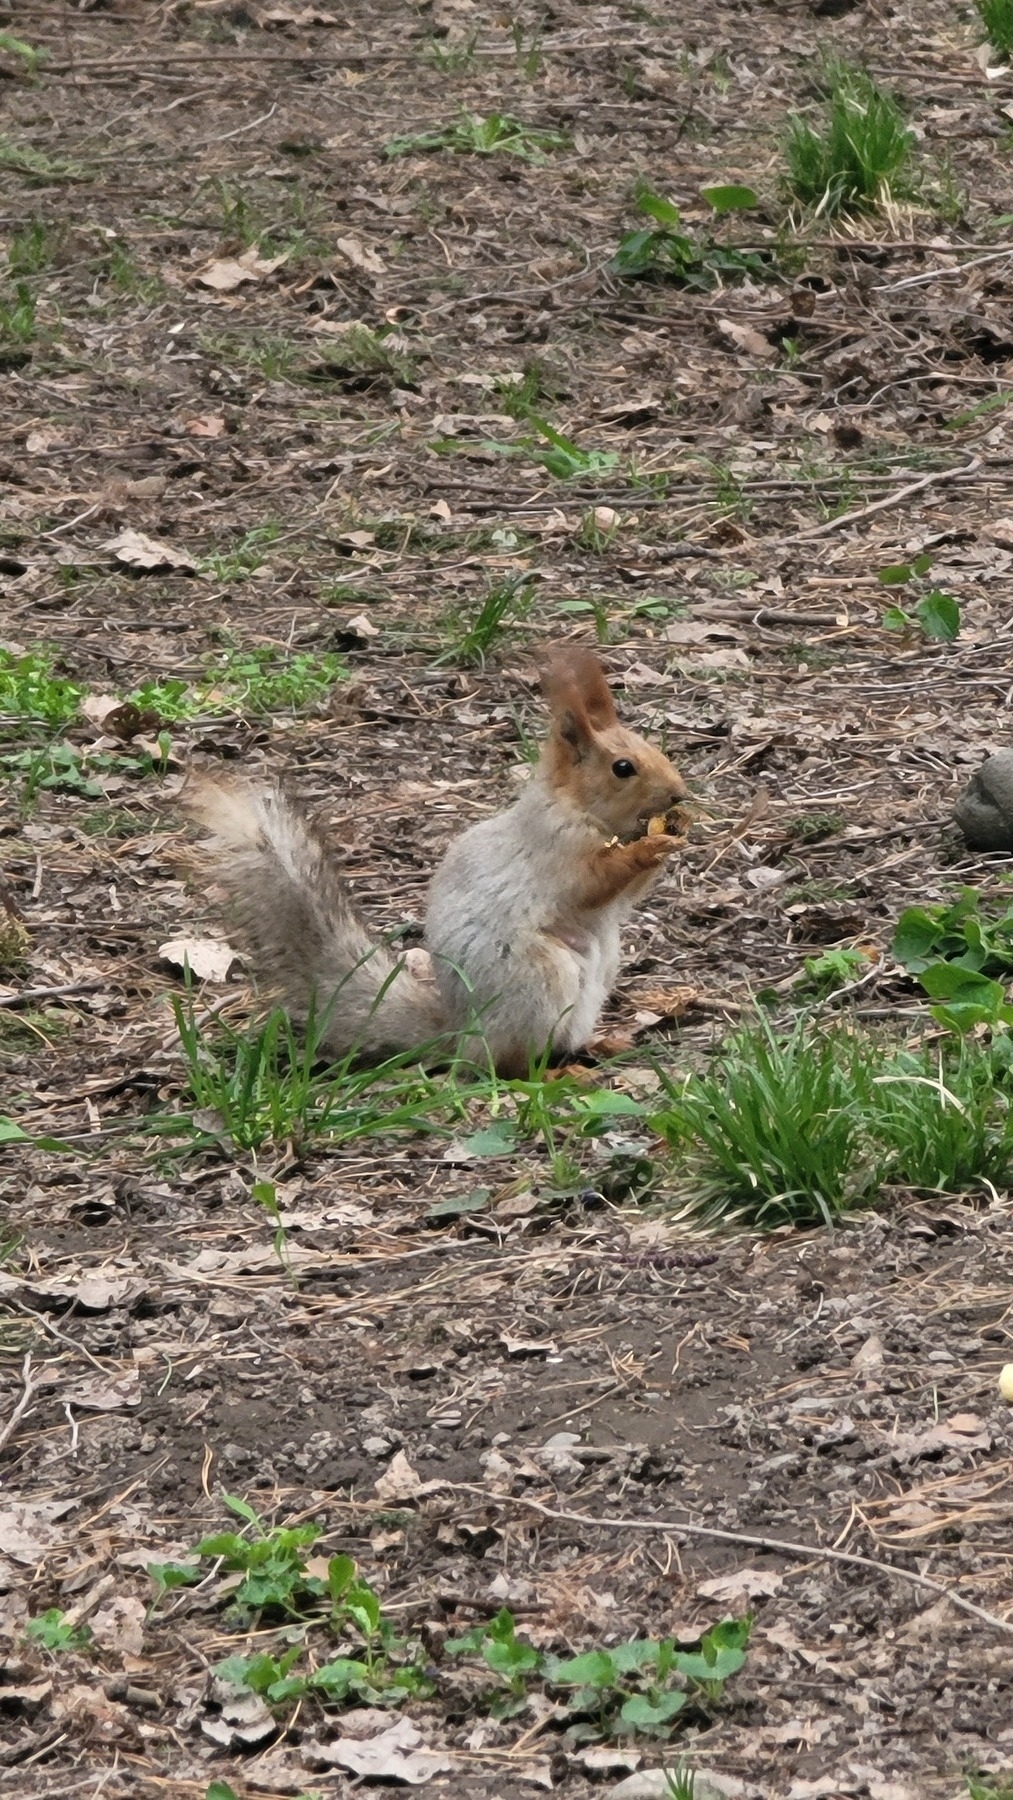 squirrel with gray body and brown furry ears eating an almond in a park